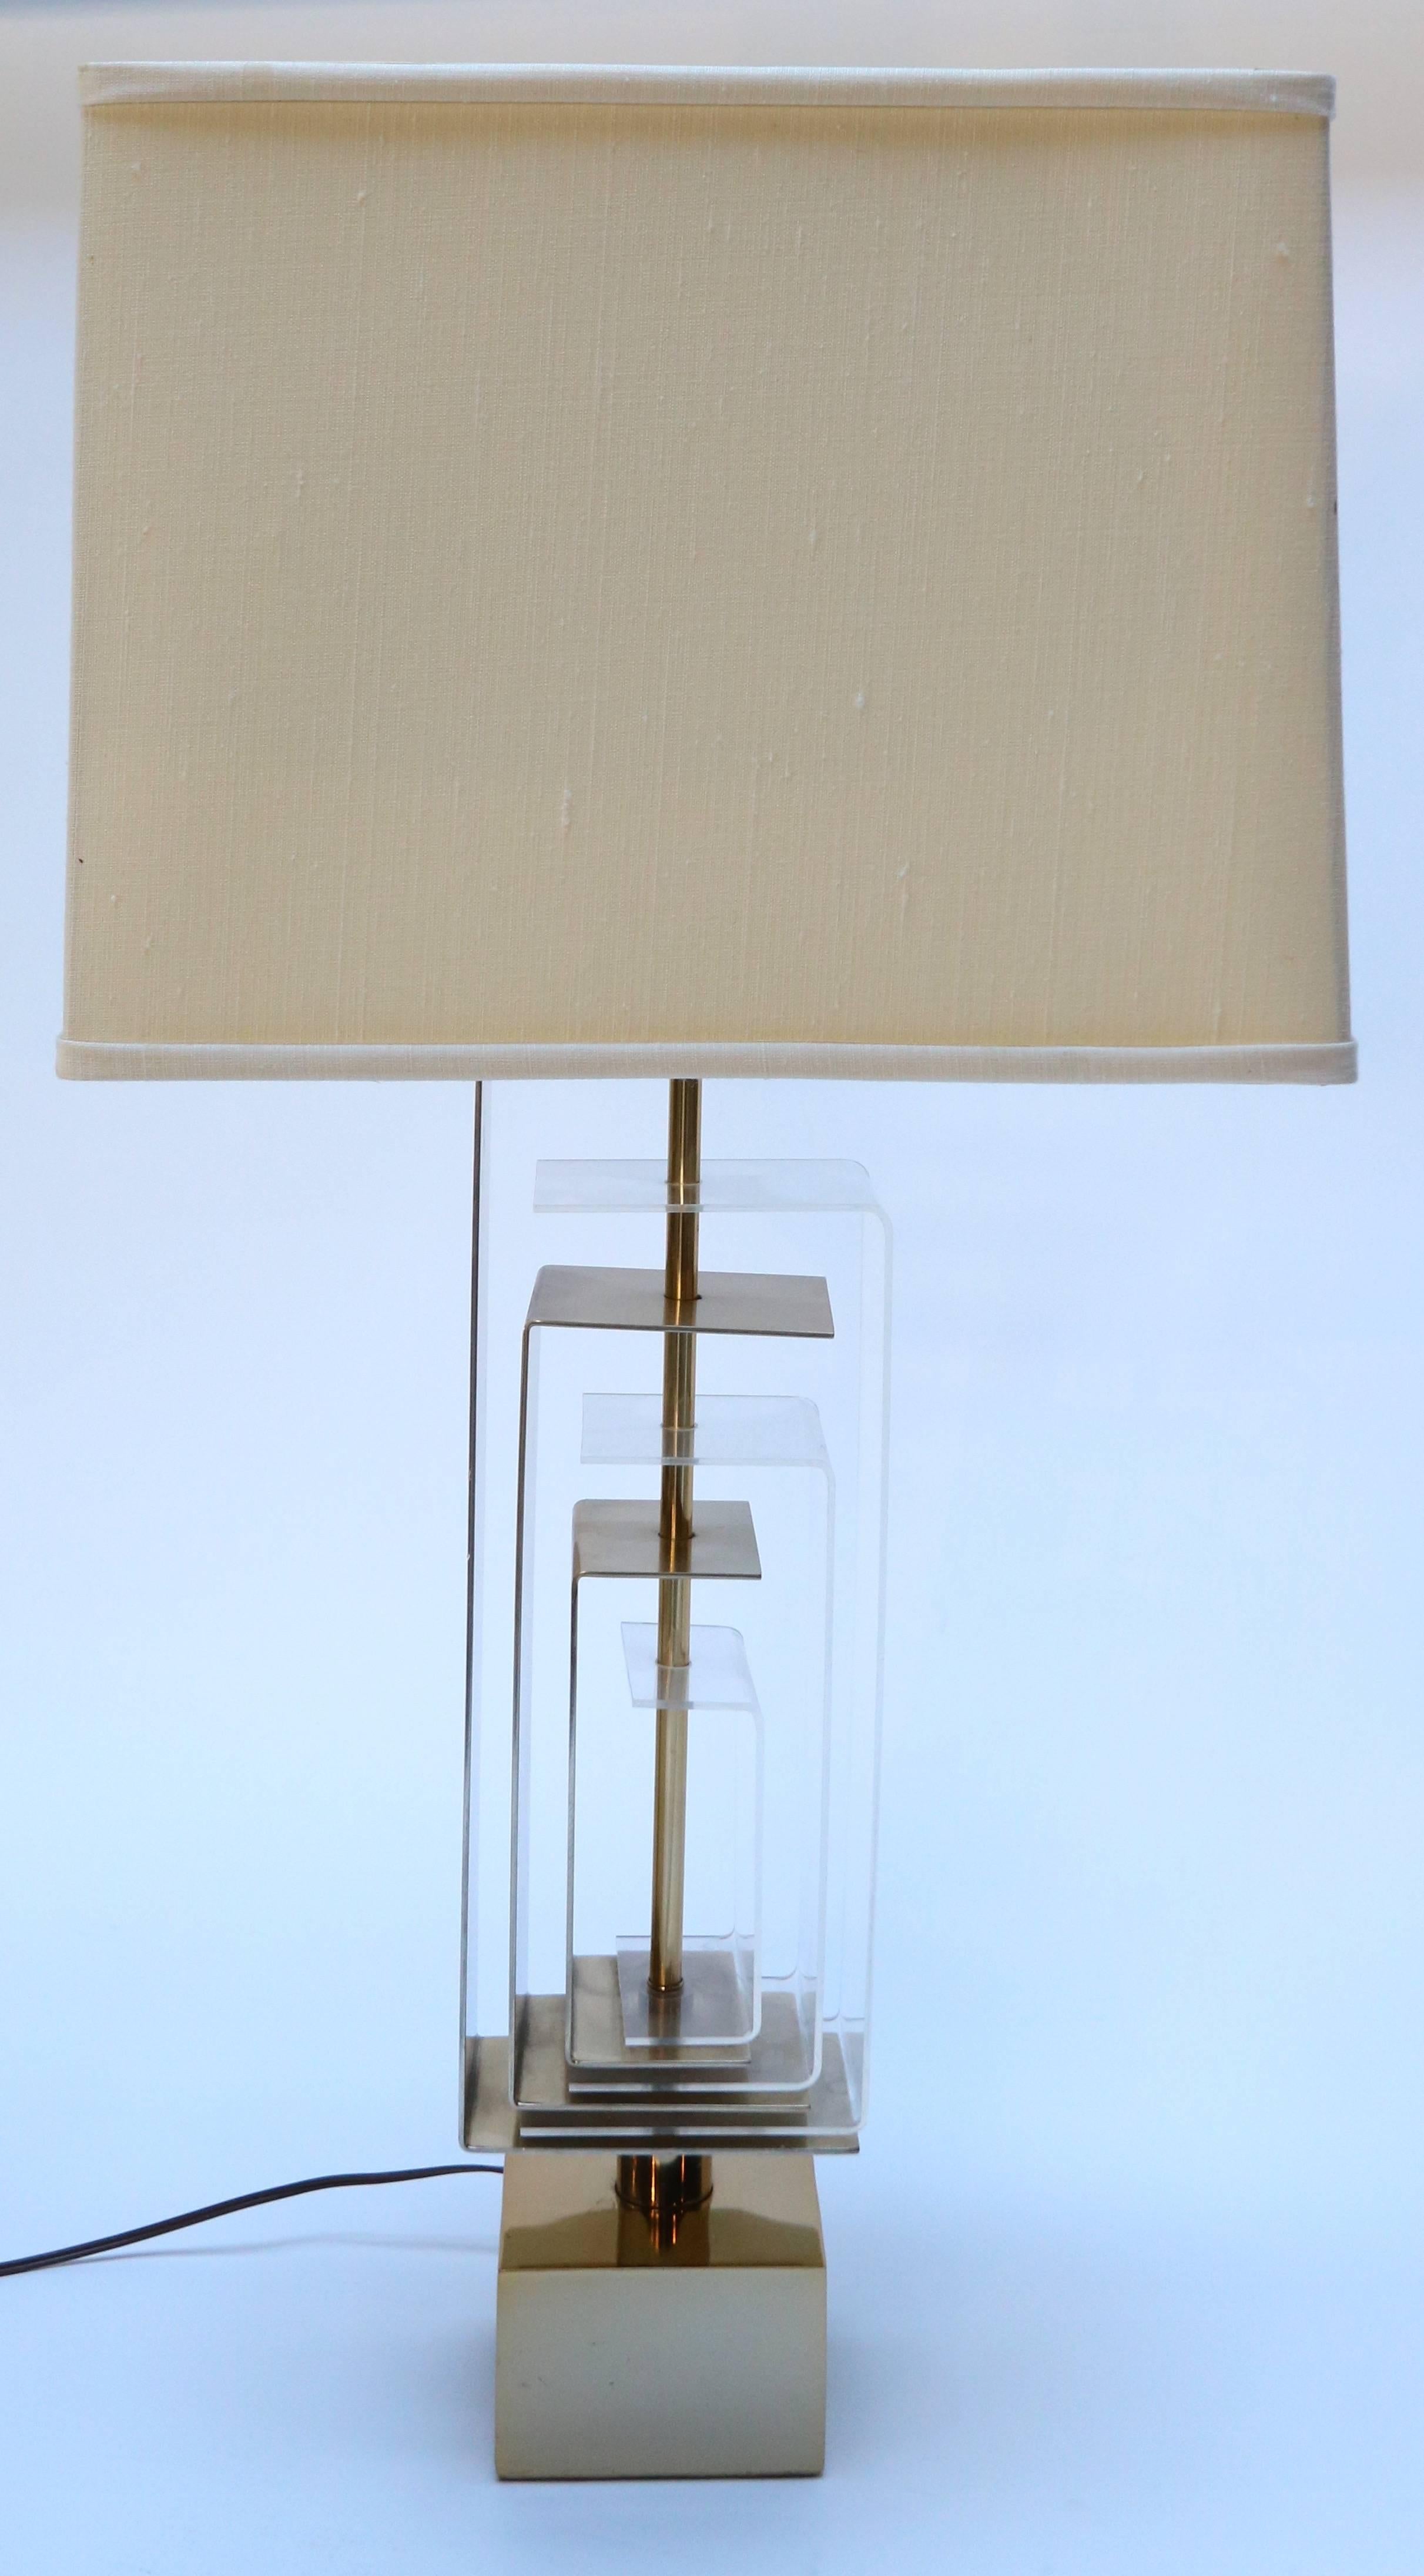 Pair of brass and acrylic table lamps by Laurel Lamp Co.

Measure: Base 5